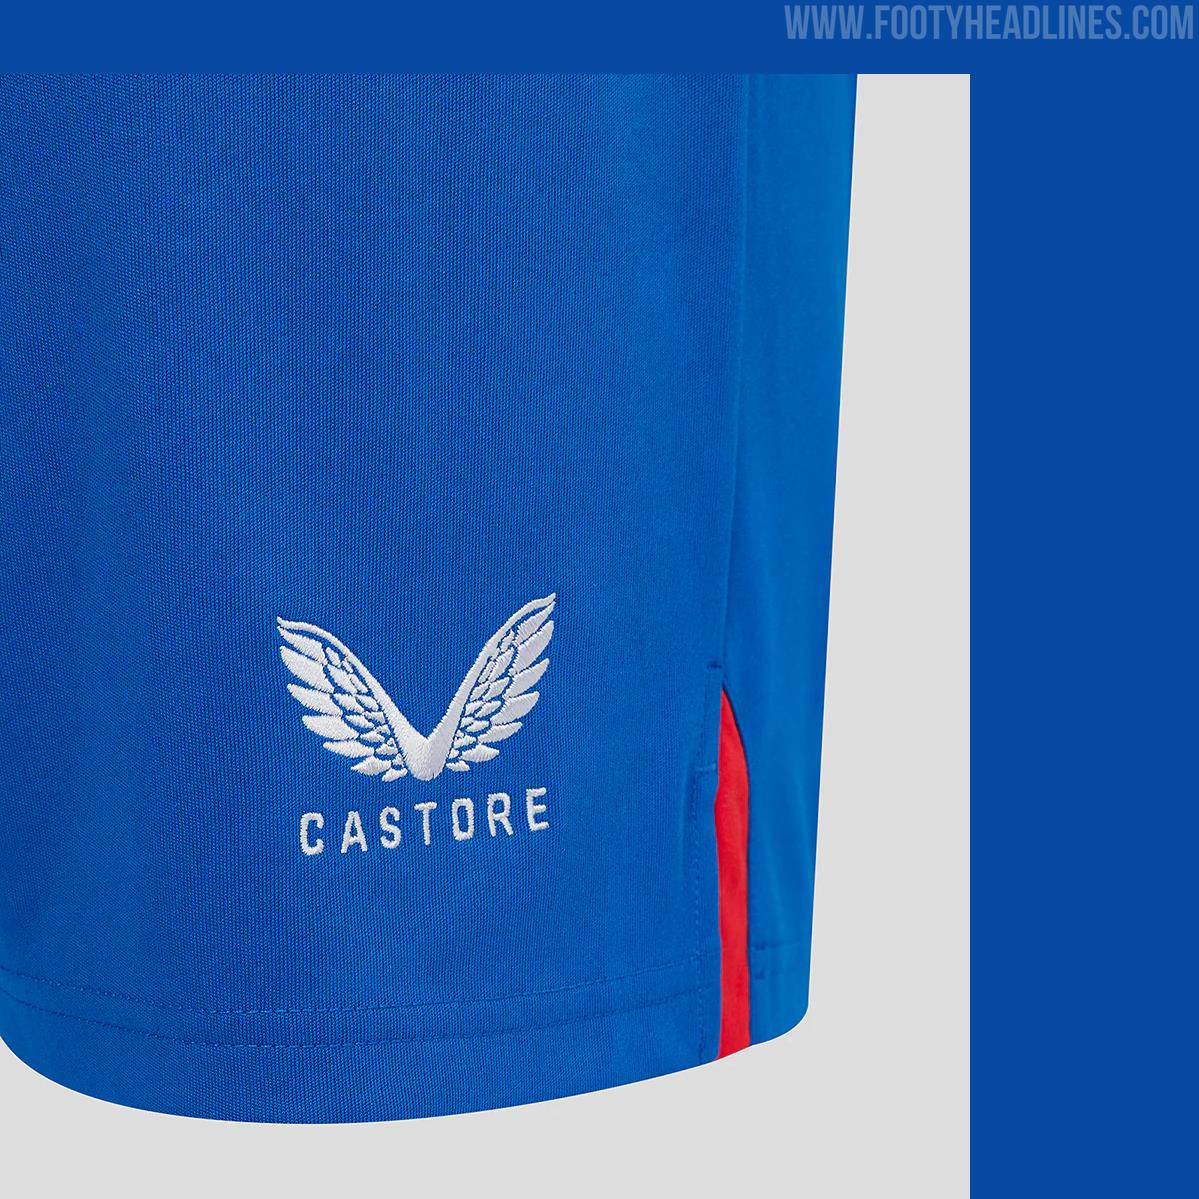 Rangers New Castore Away Kit 23/24: First Look, Cost, Sponsor, Supplier and  How to Buy